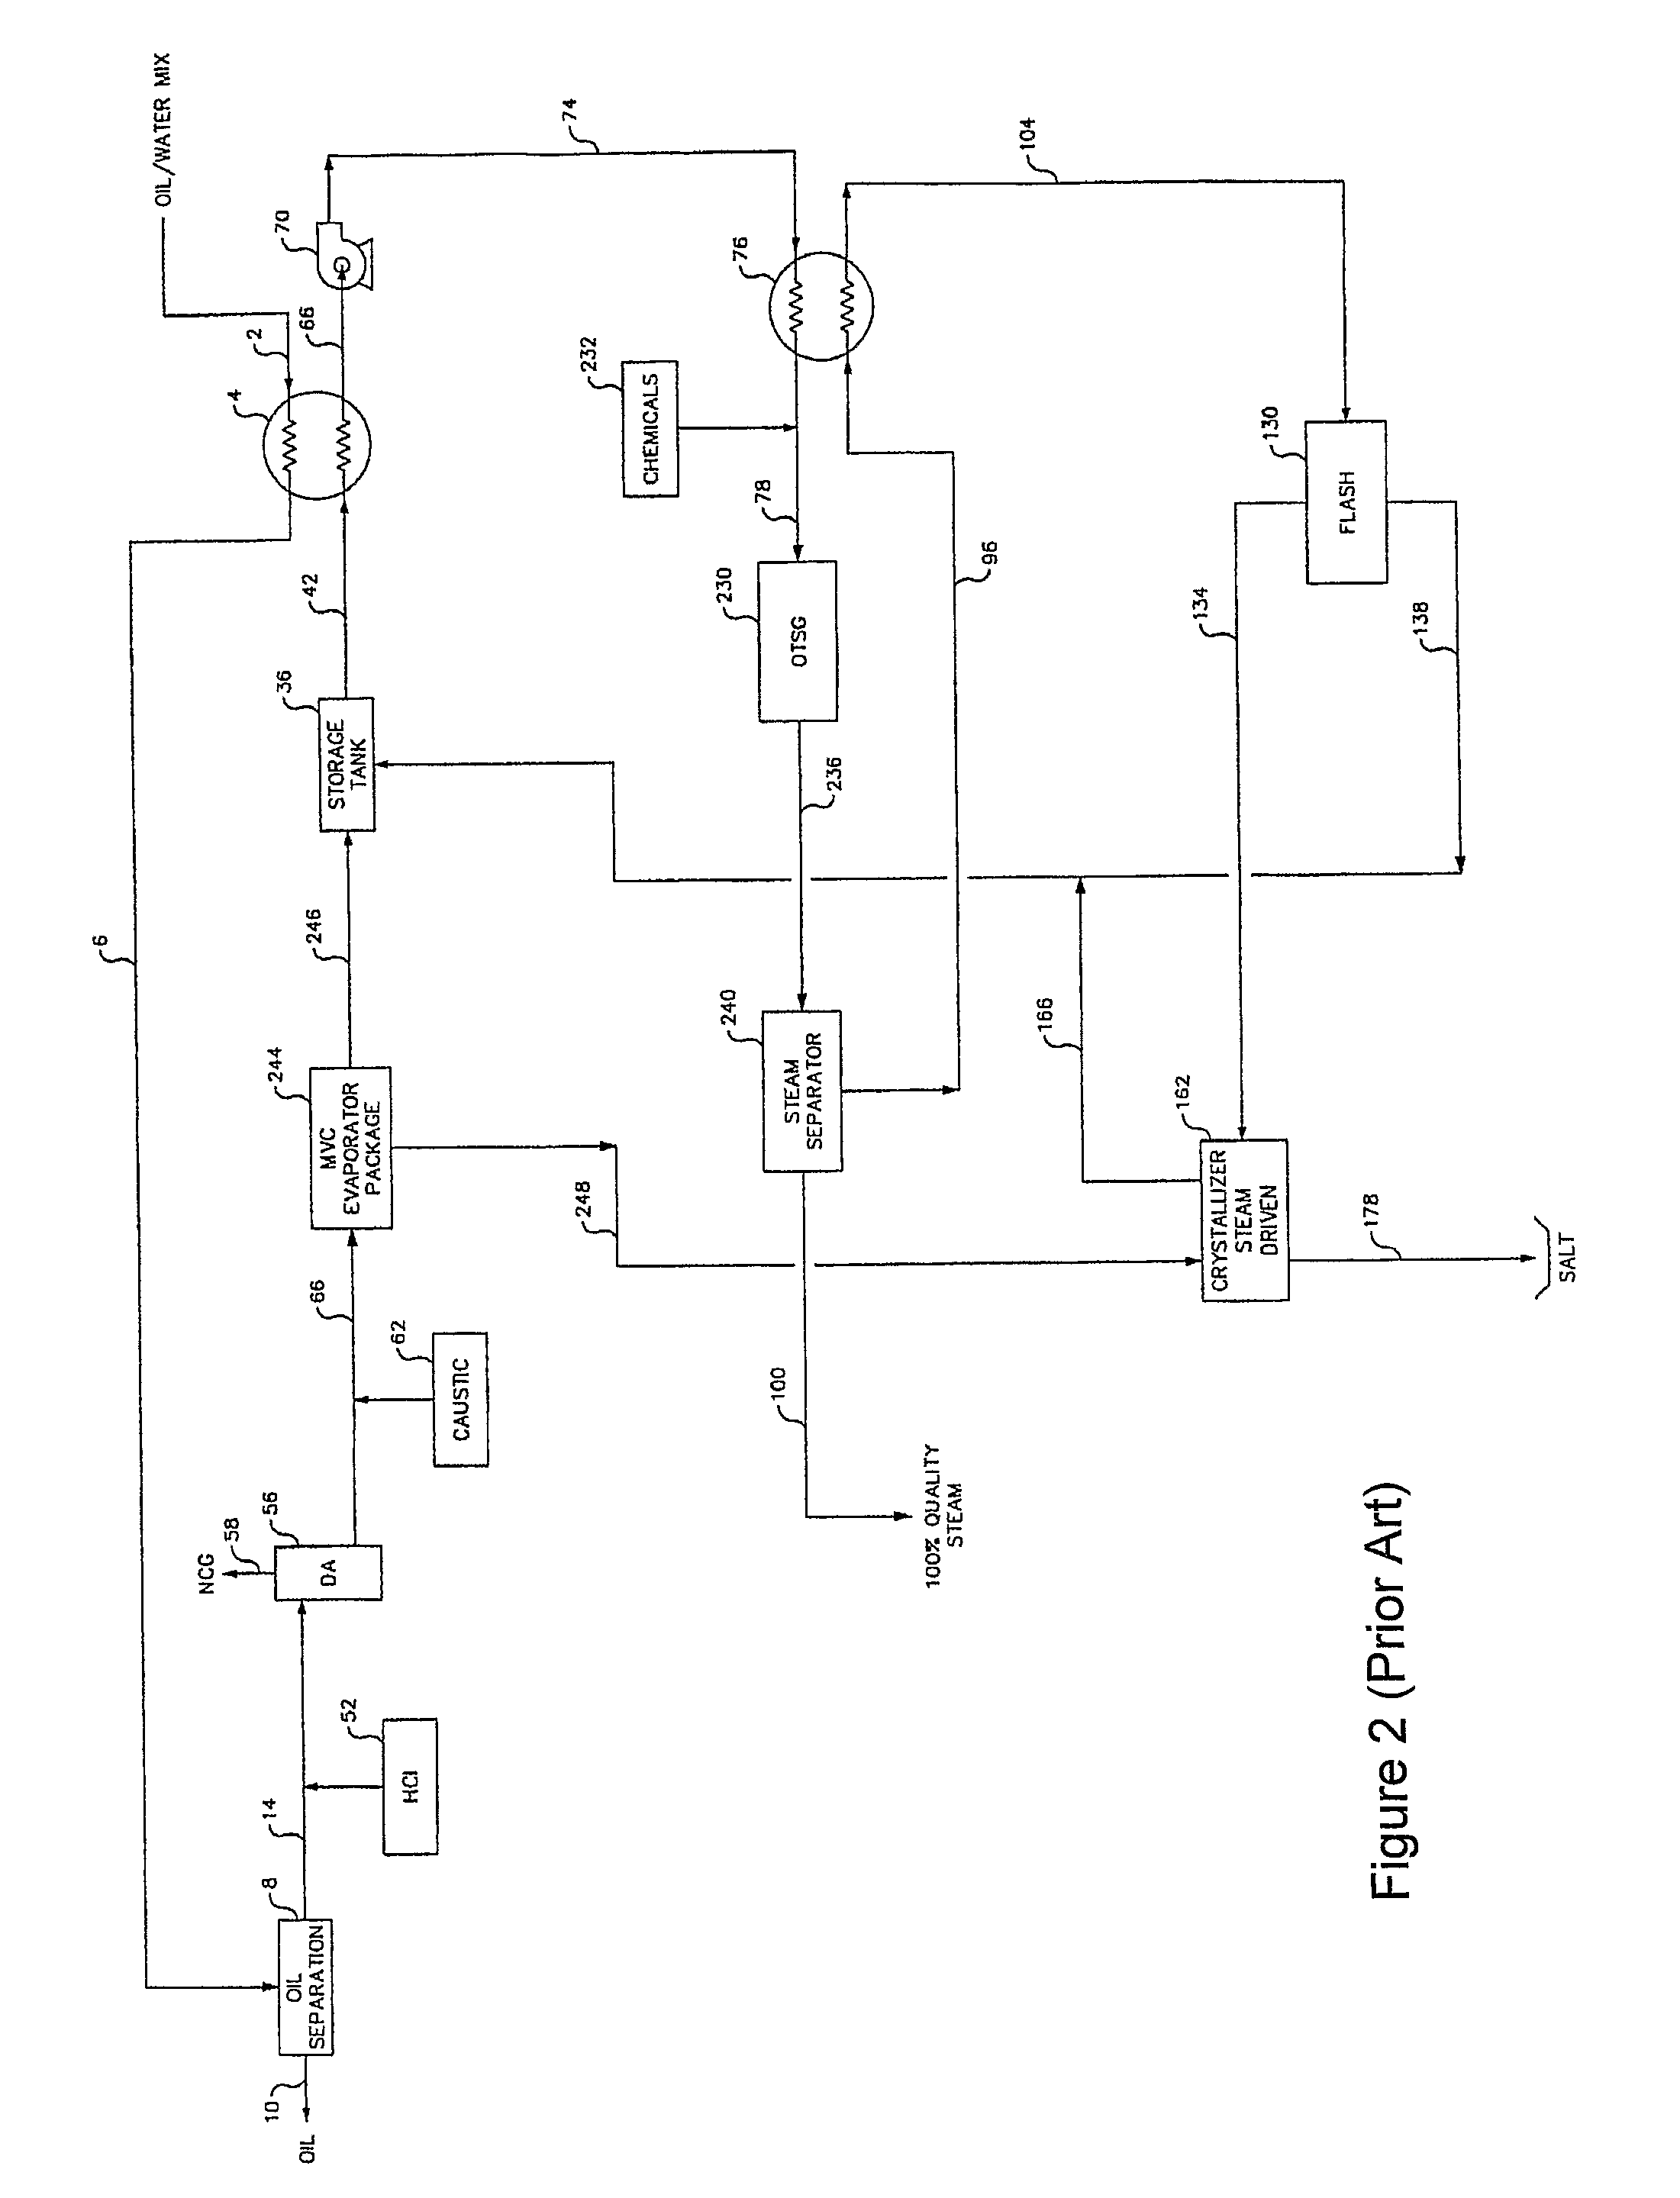 Method for production of high pressure steam from produced water